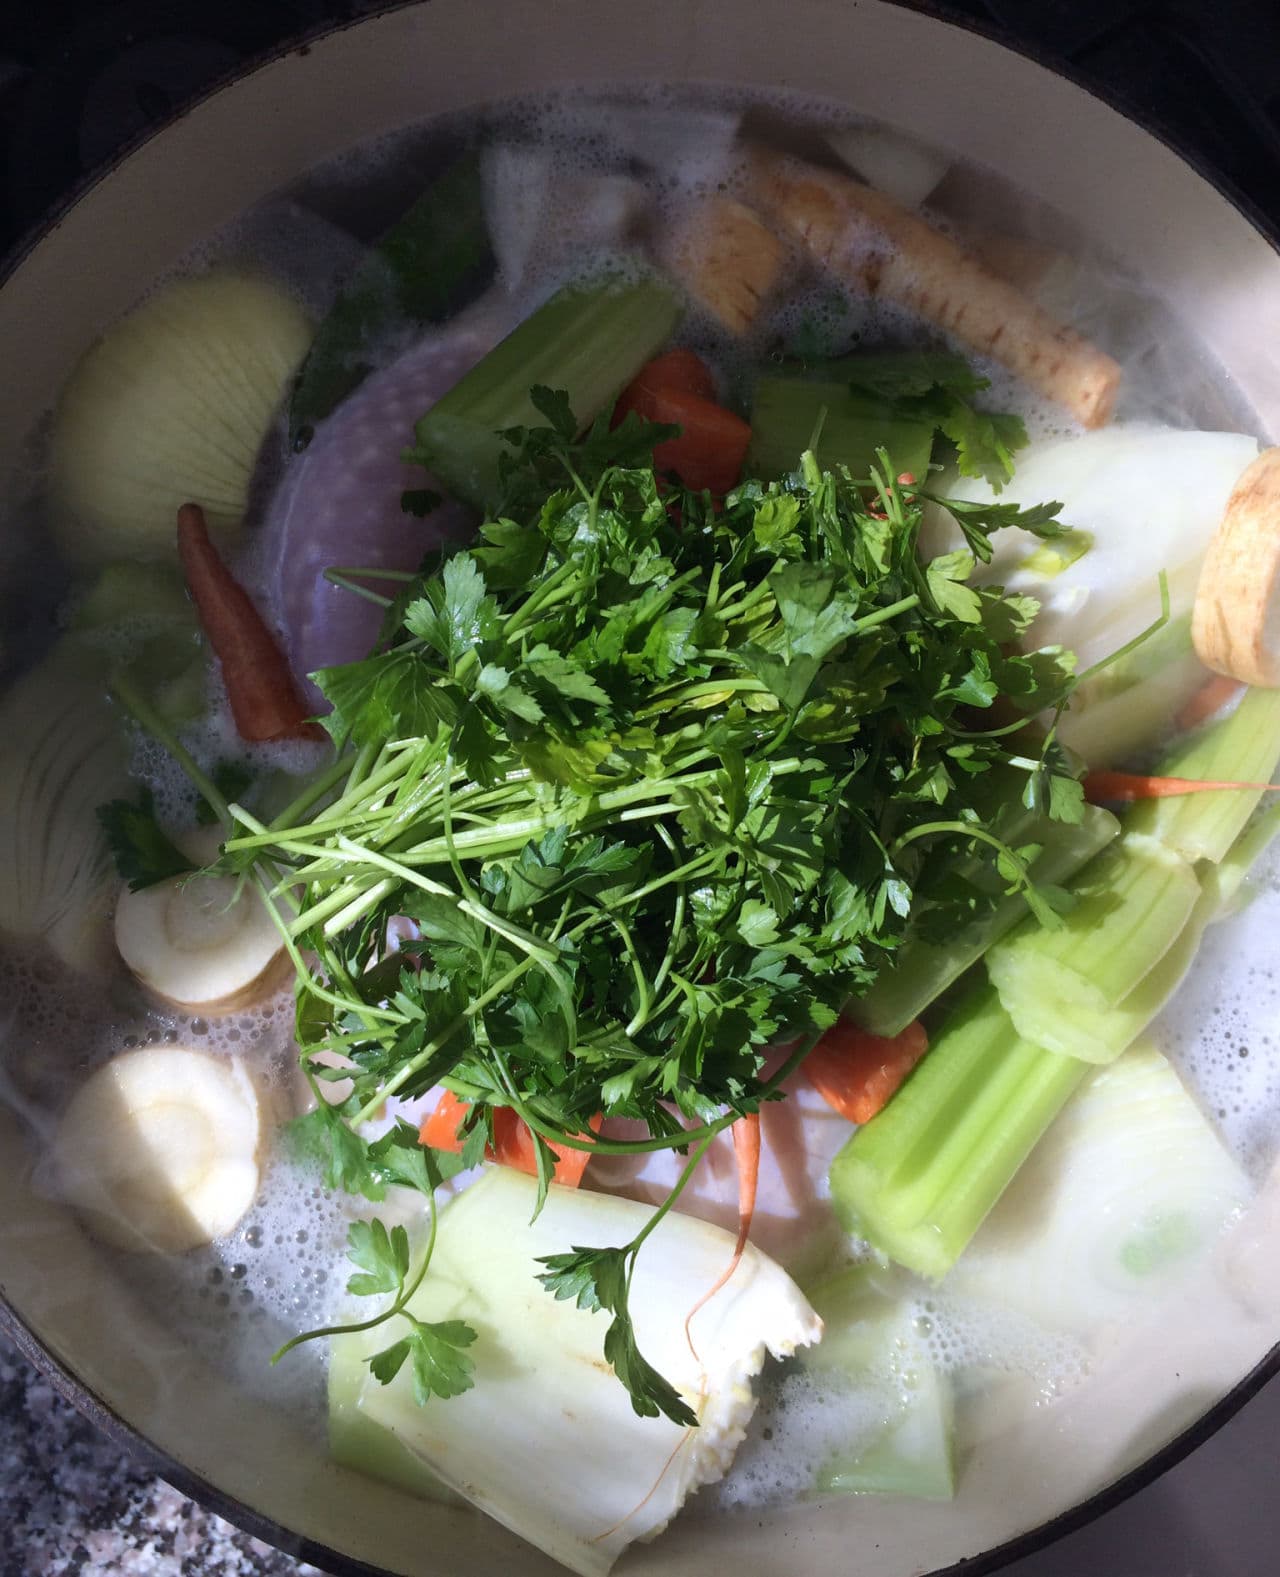 Parsley is key to chicken soup. (Kathy Gunst)